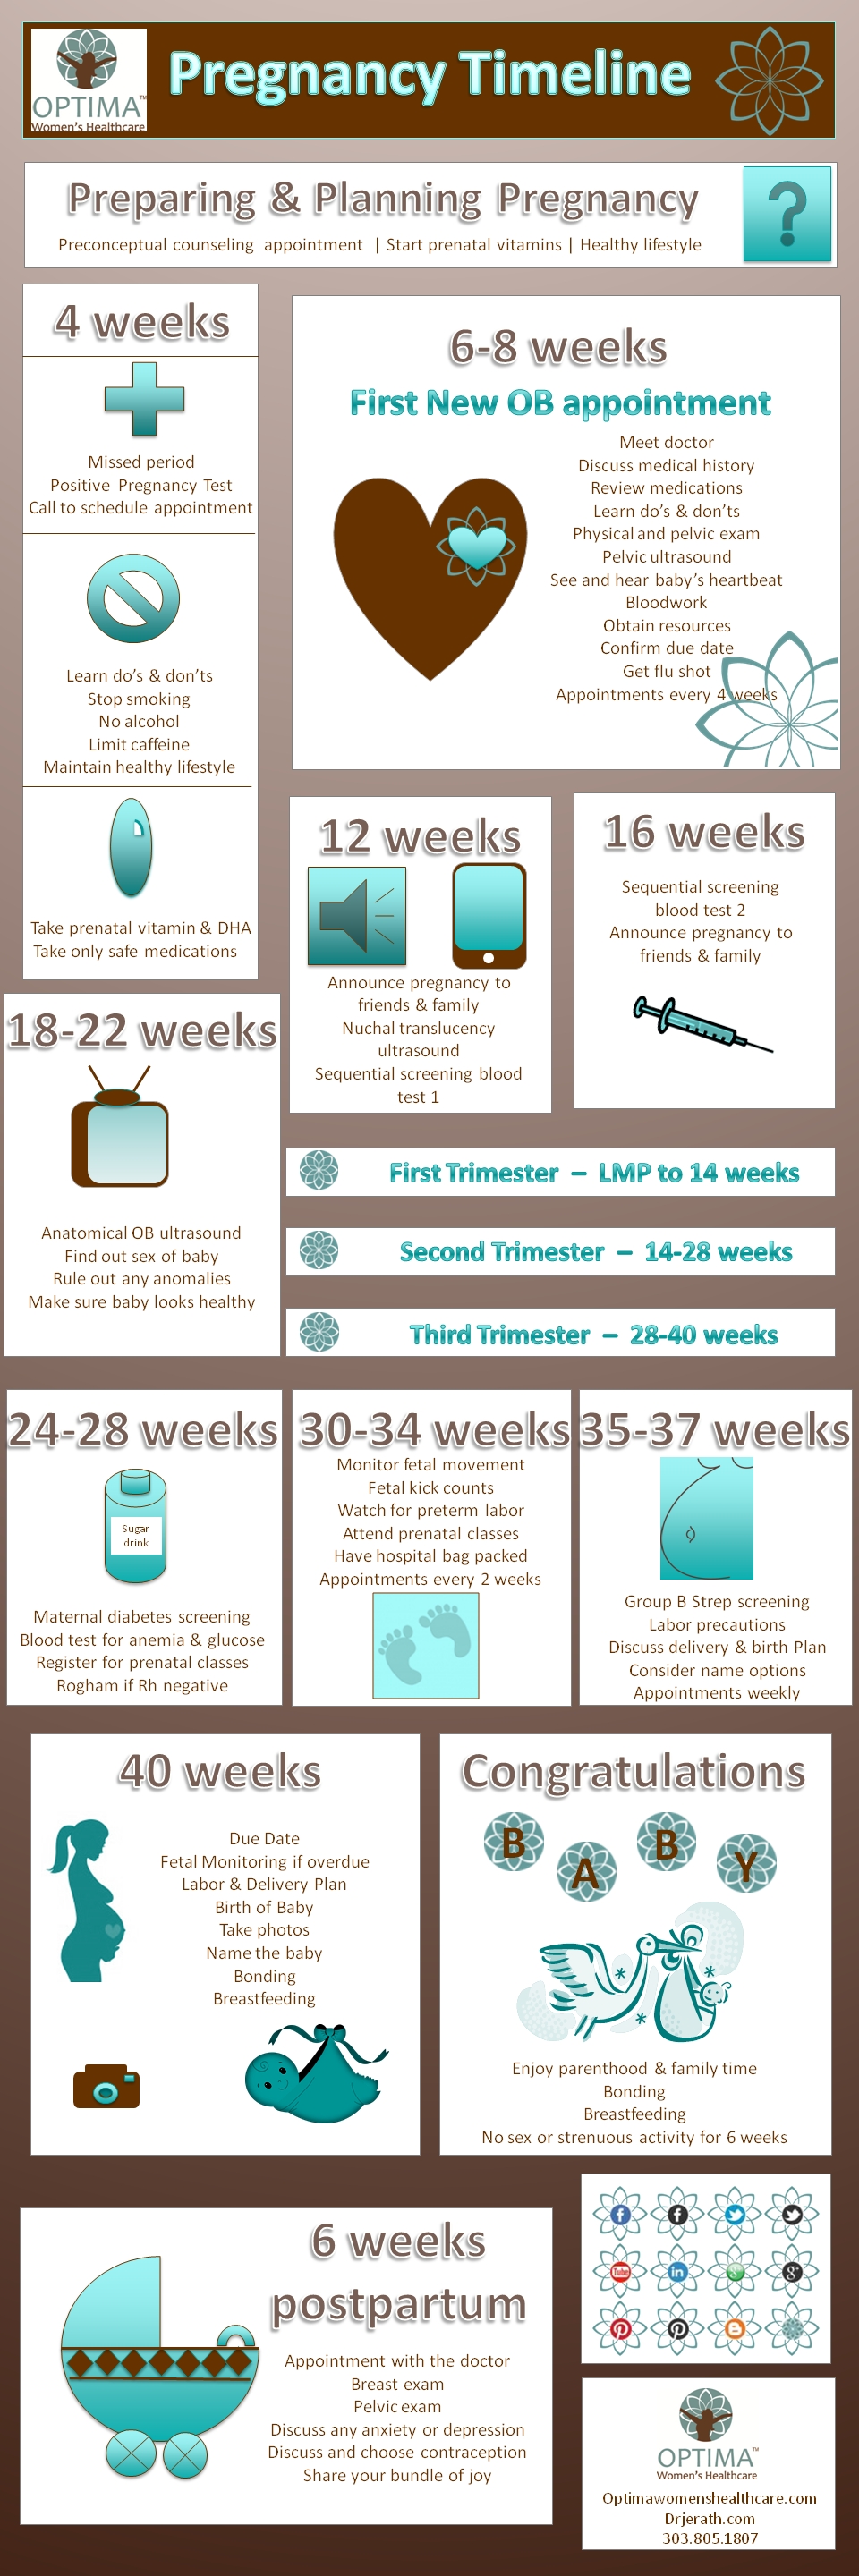 Optimawhc Pregnancy Timeline For Preparing And Planning Pregnancy  Pregnancy Timeline Week By Week